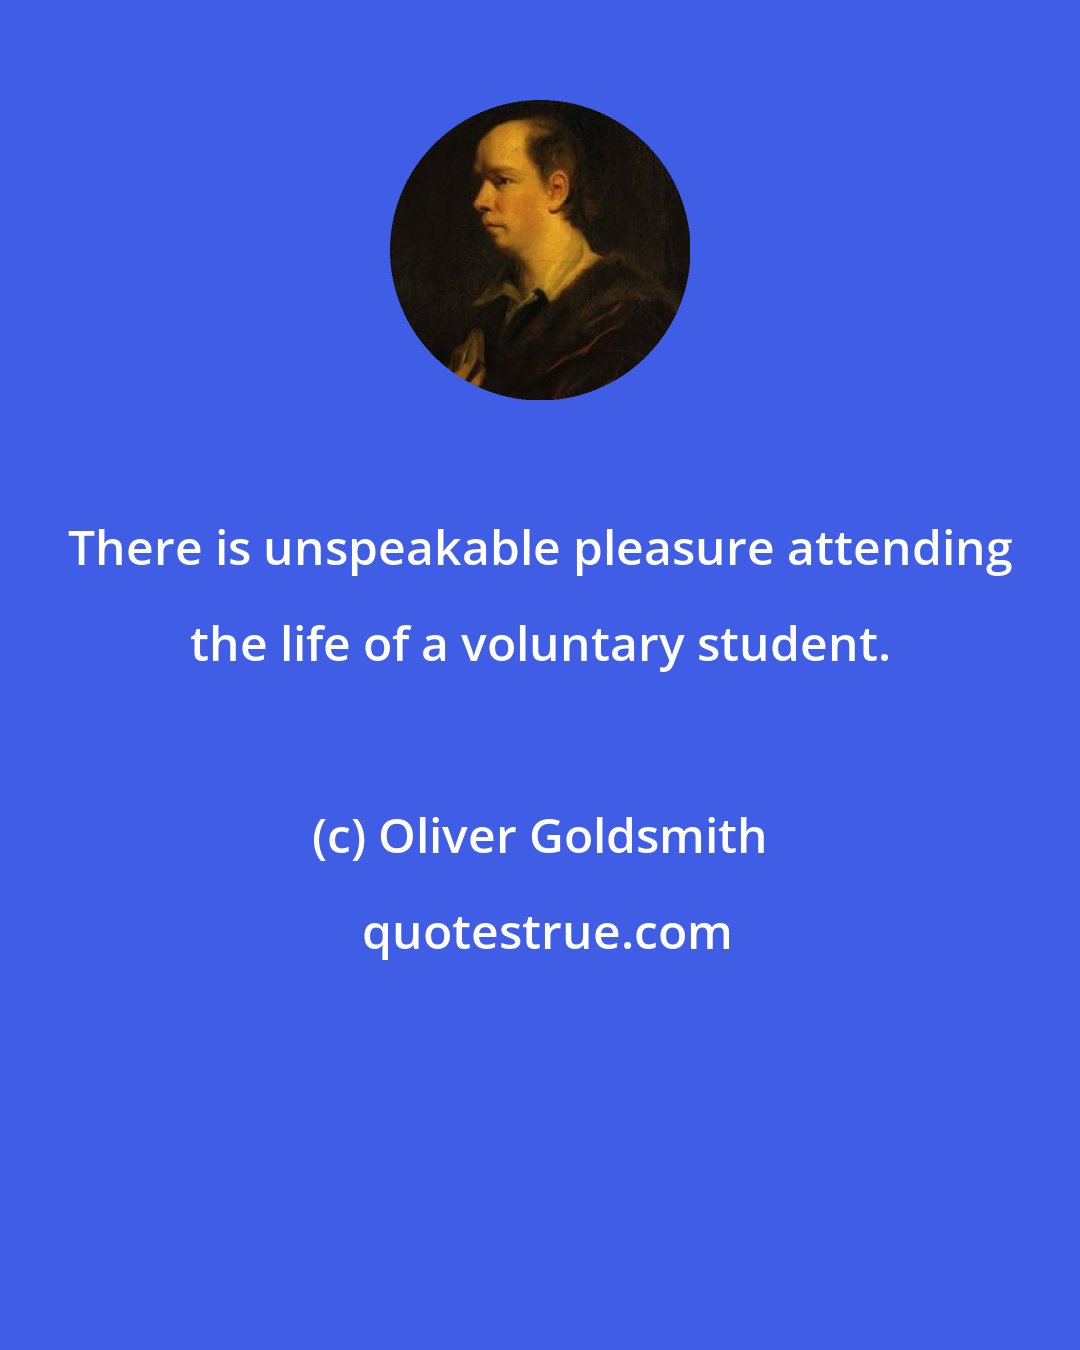 Oliver Goldsmith: There is unspeakable pleasure attending the life of a voluntary student.